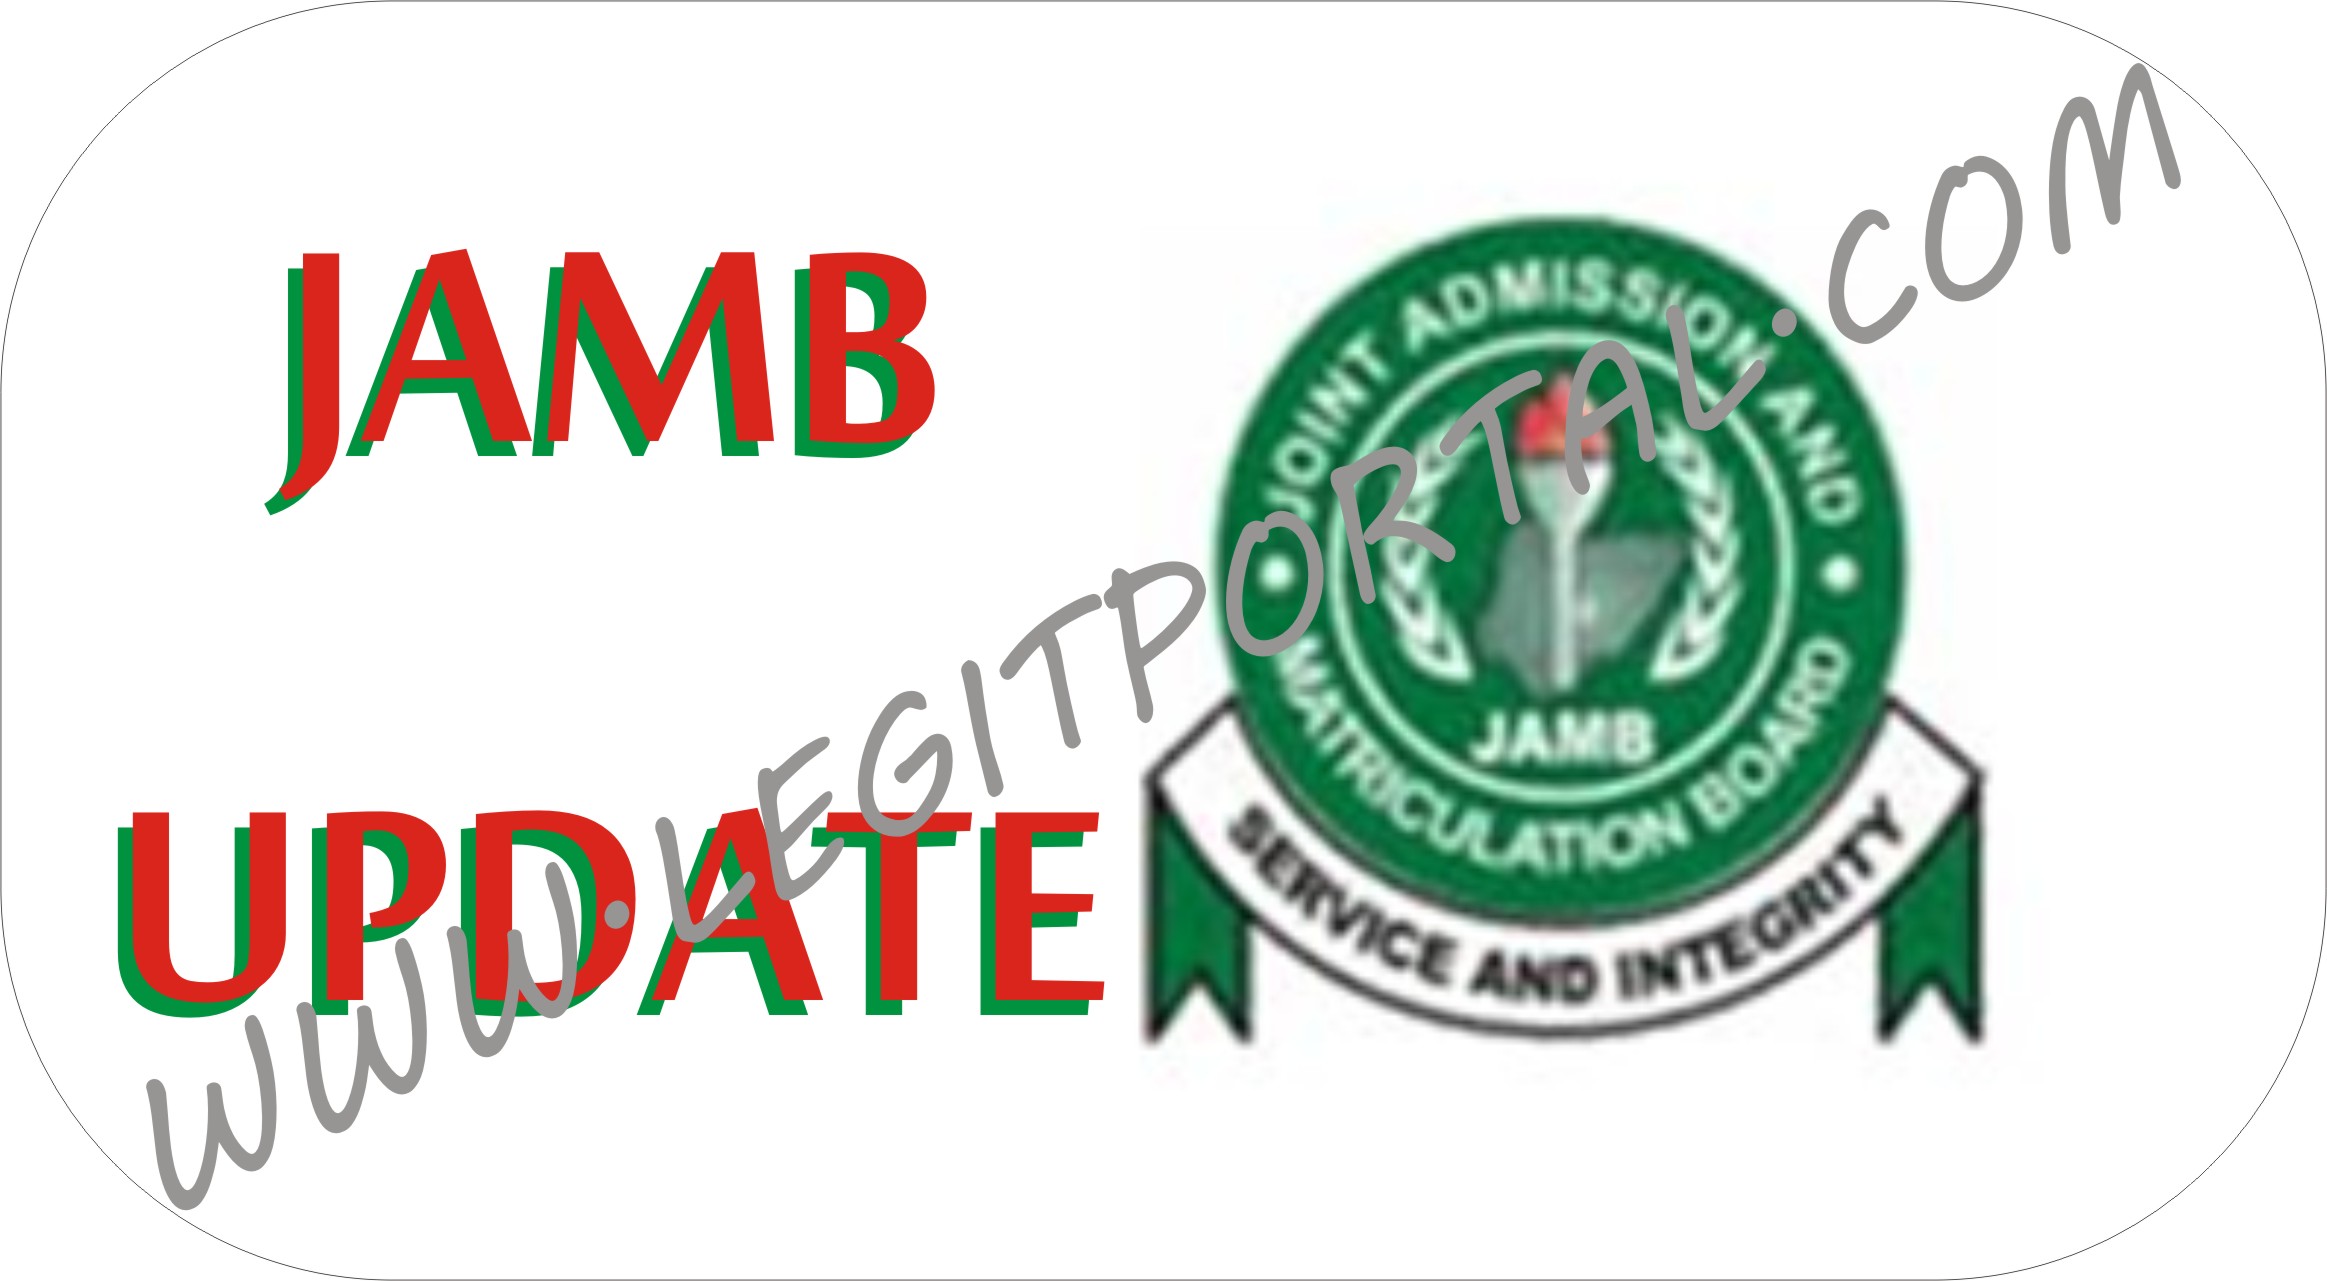 JAMB Slip Reprint 2019- How to check JAMB exam center, date and time